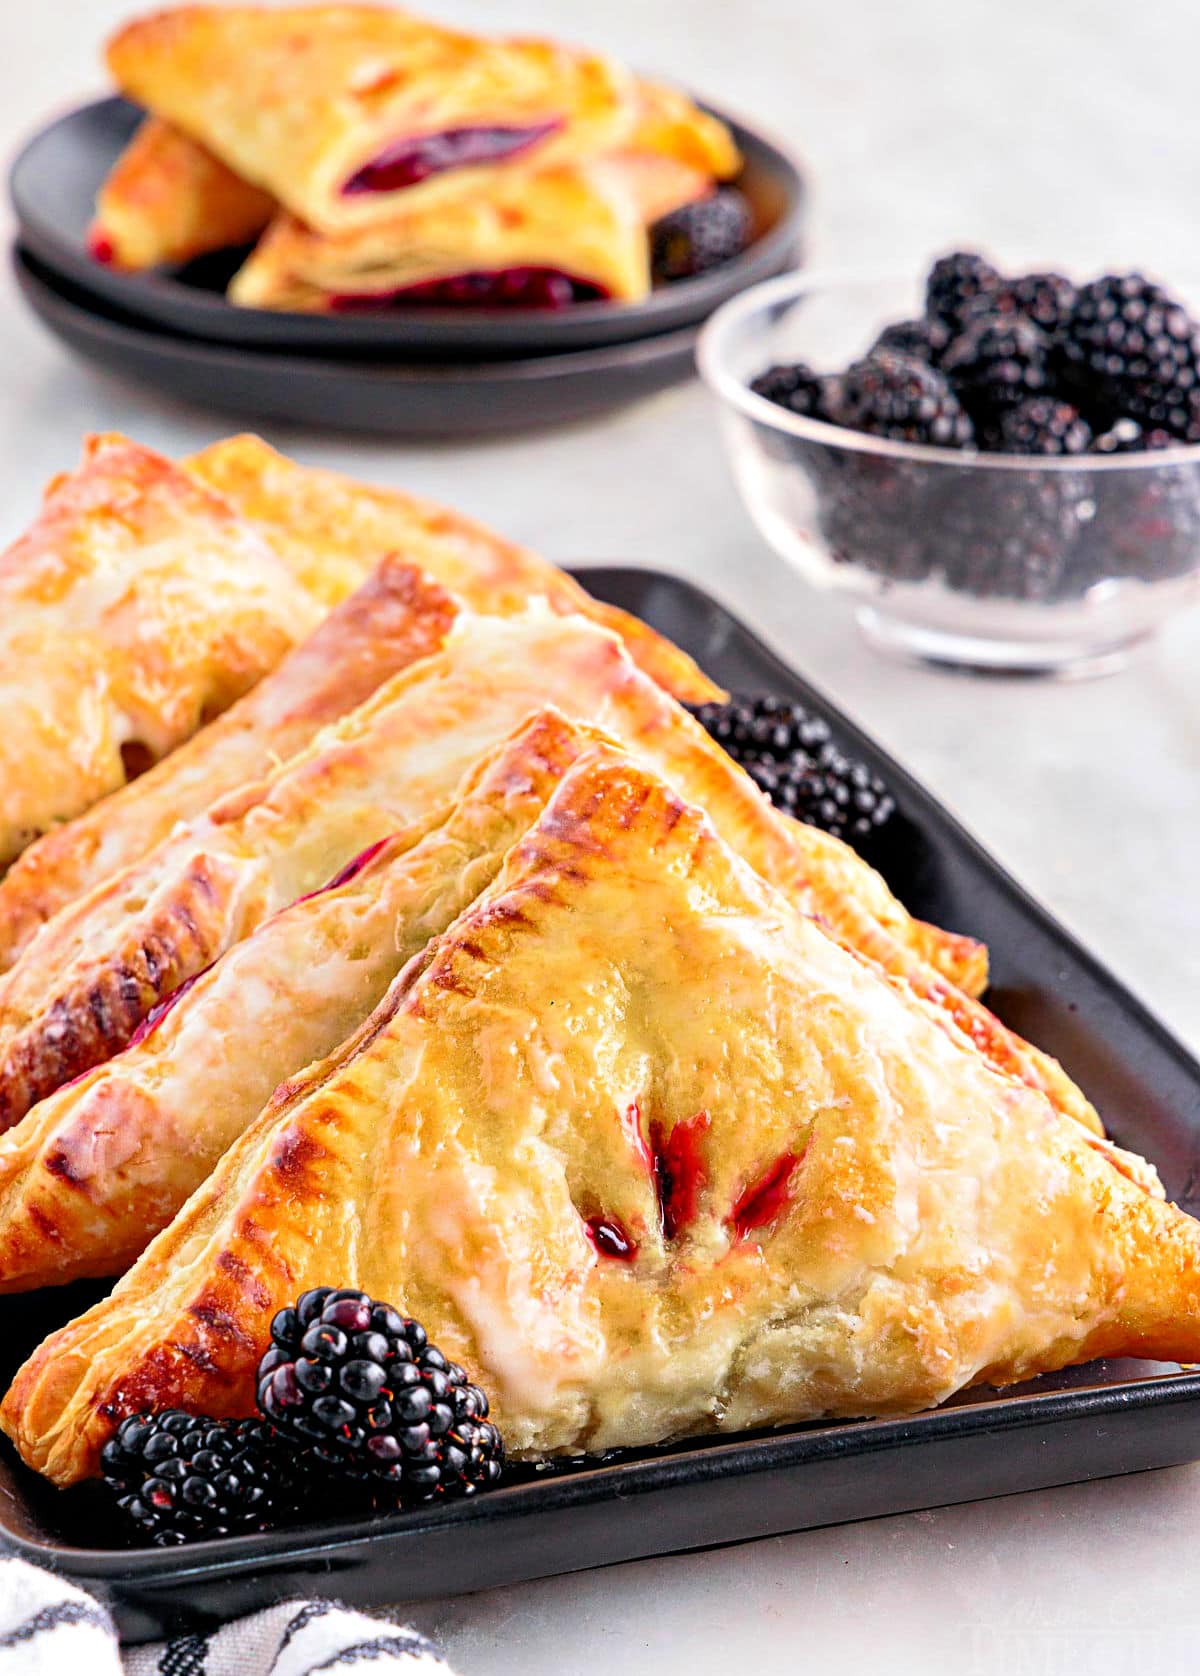 front view of black rectangular plate with turnovers lined up ready to be served. bowl of blackberries is off the the right side.